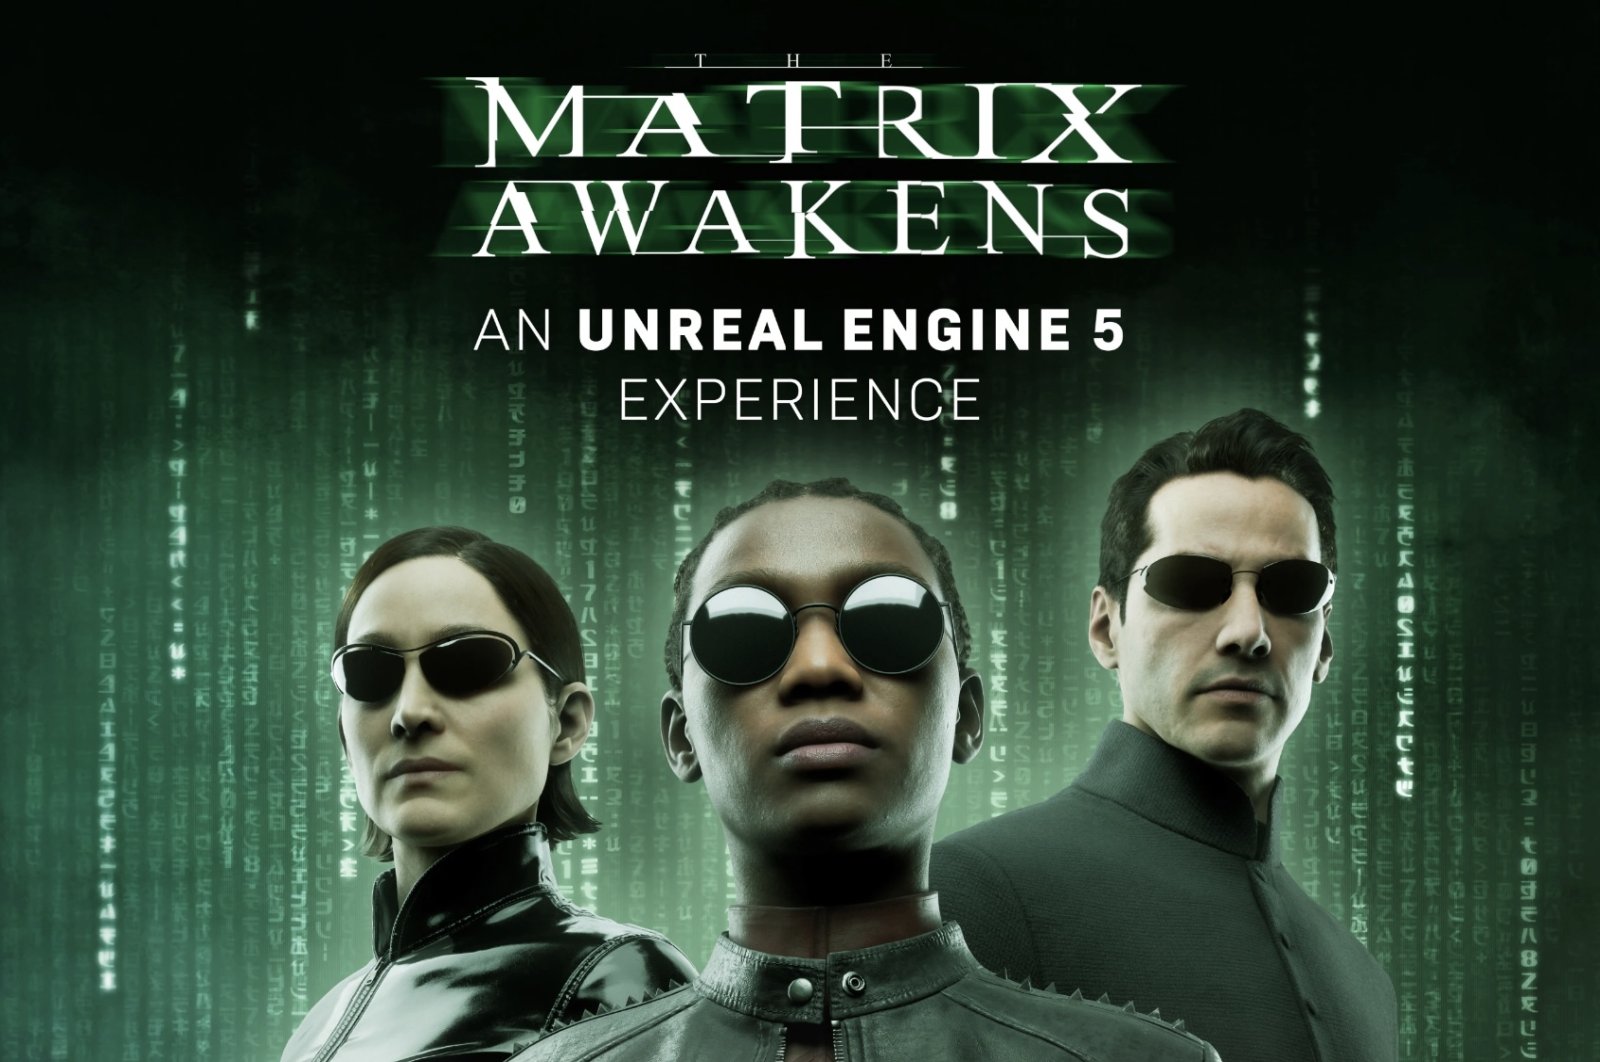 The promotional poster for the Matrix Awakens (Photo courtesy of Epic Games and Warner Bros.)